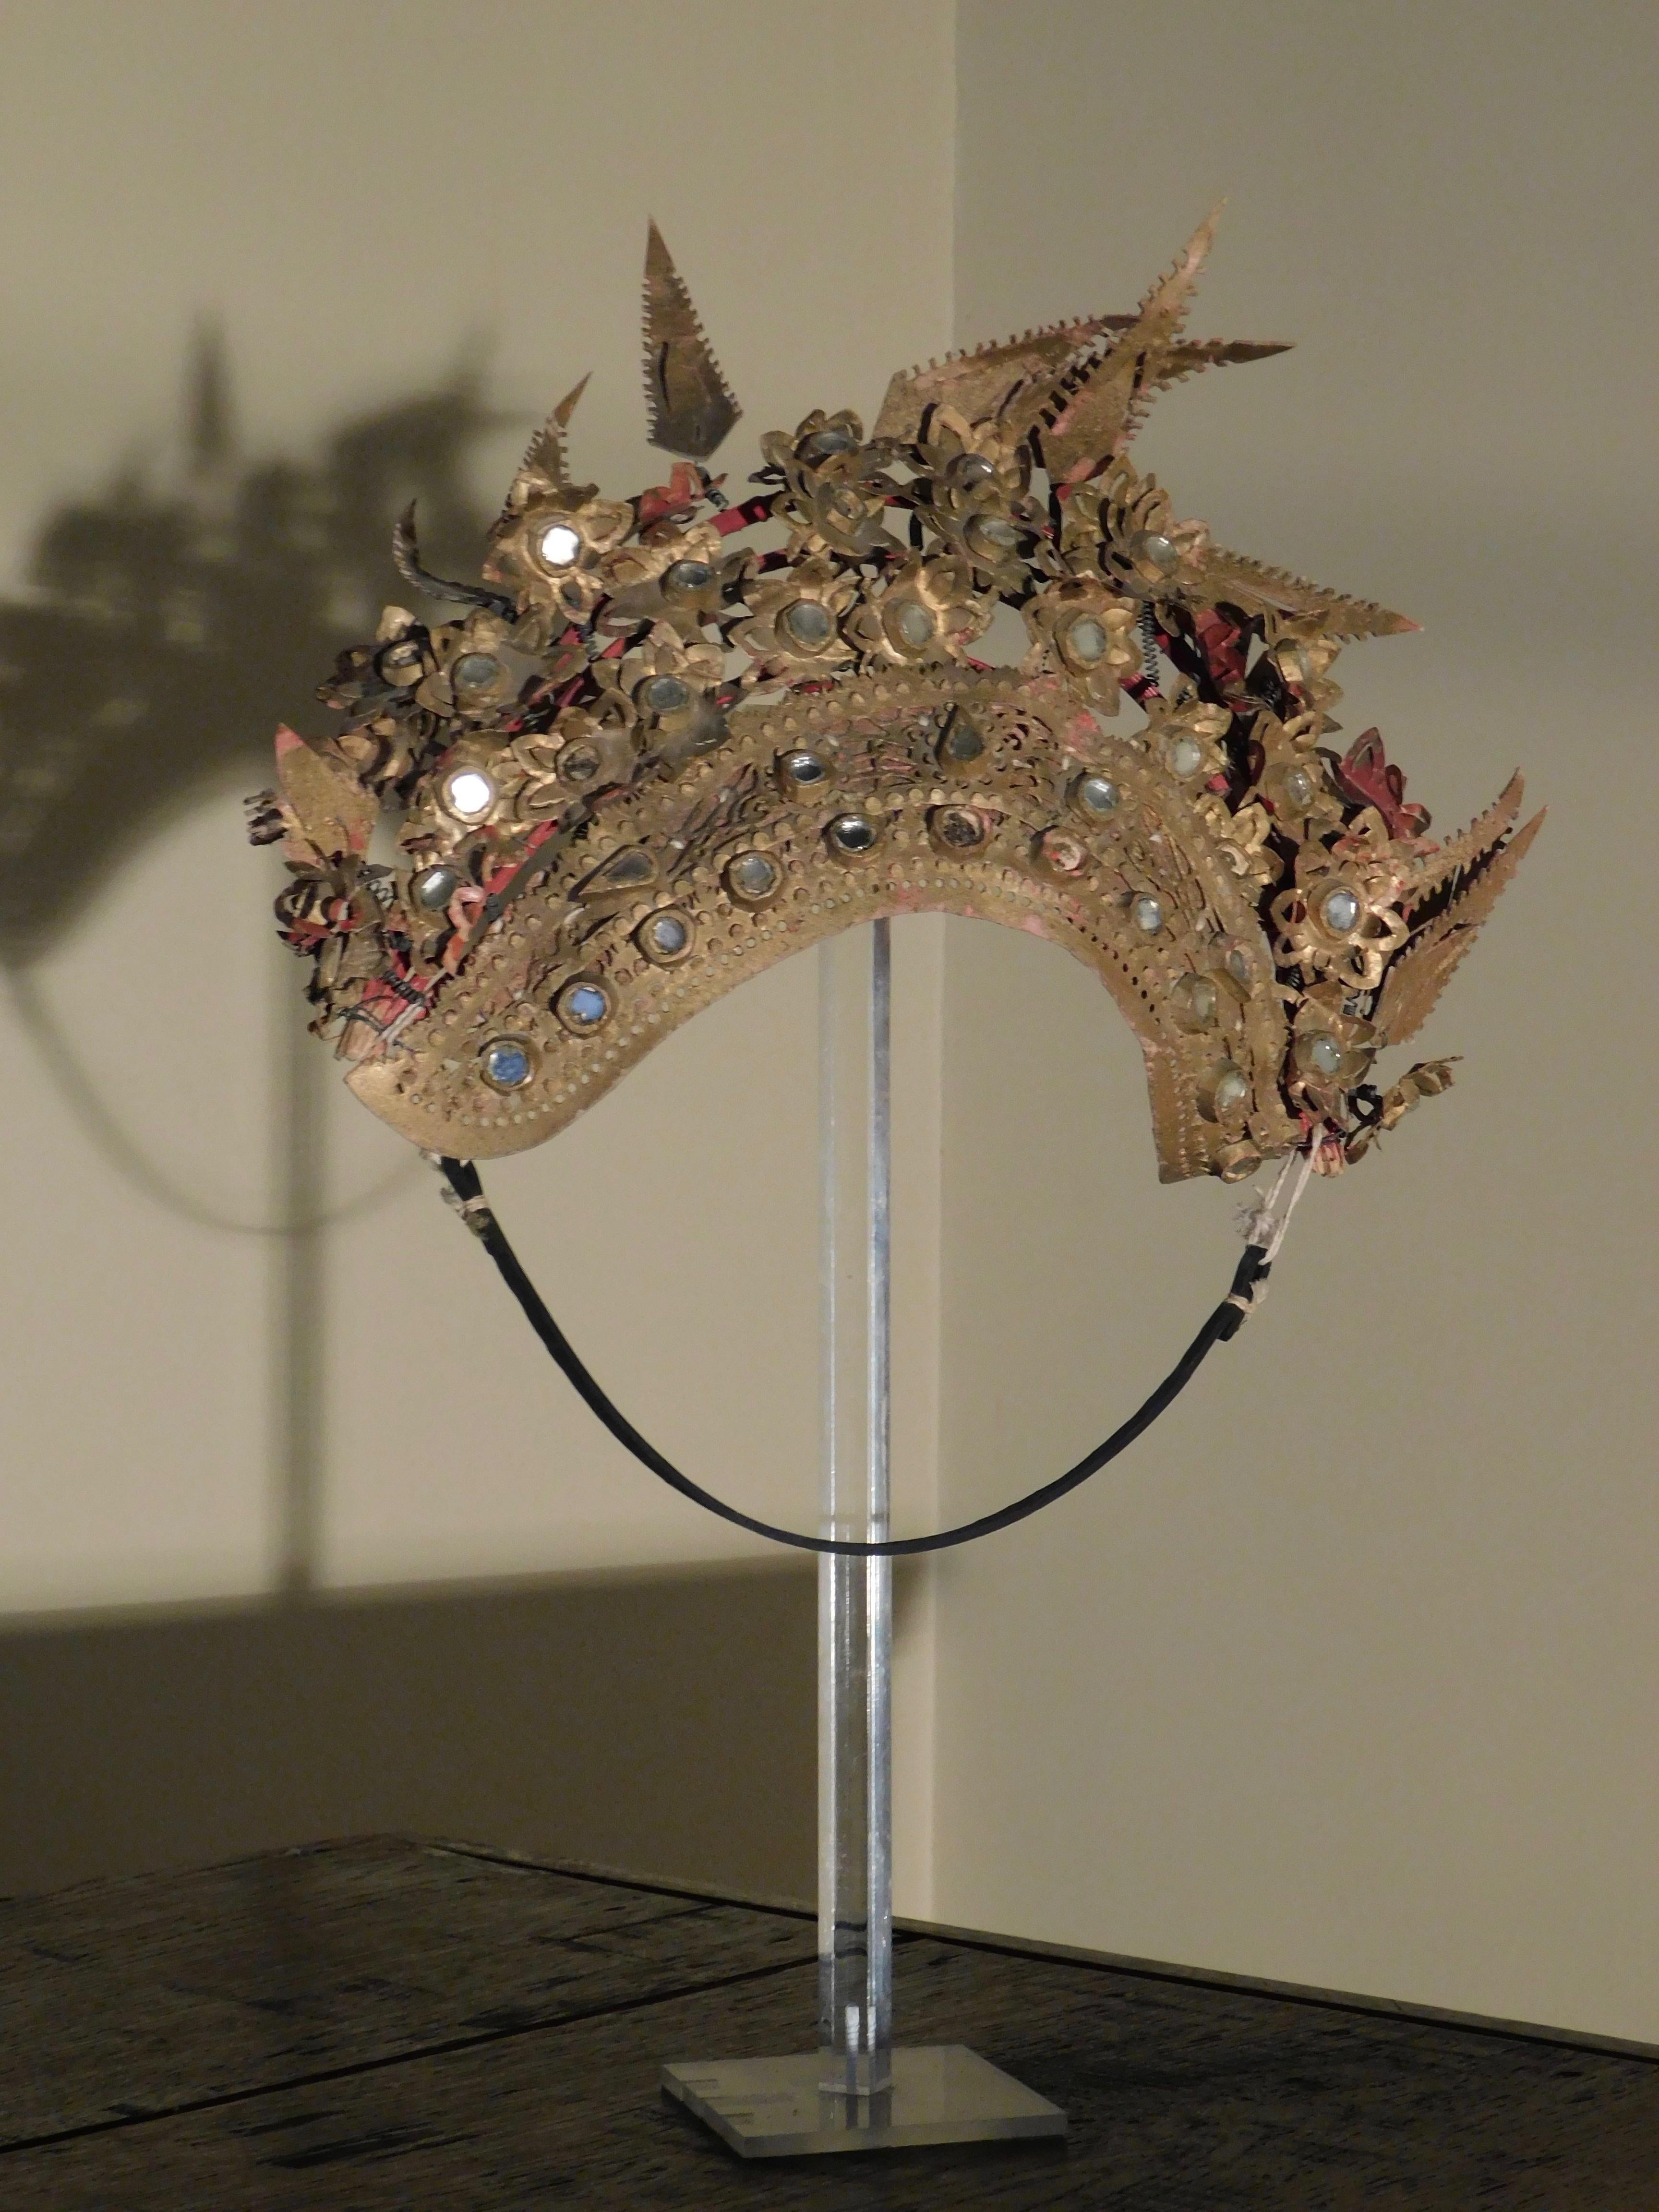 Qing dynasty Provincial Chinese wedding tiara, circa 1900.
The tiara is constructed with a painted wood frame with handwoven textile padding and decorated with delicately handcut leather. The leather is gold painted and mounted with glass mirrors.